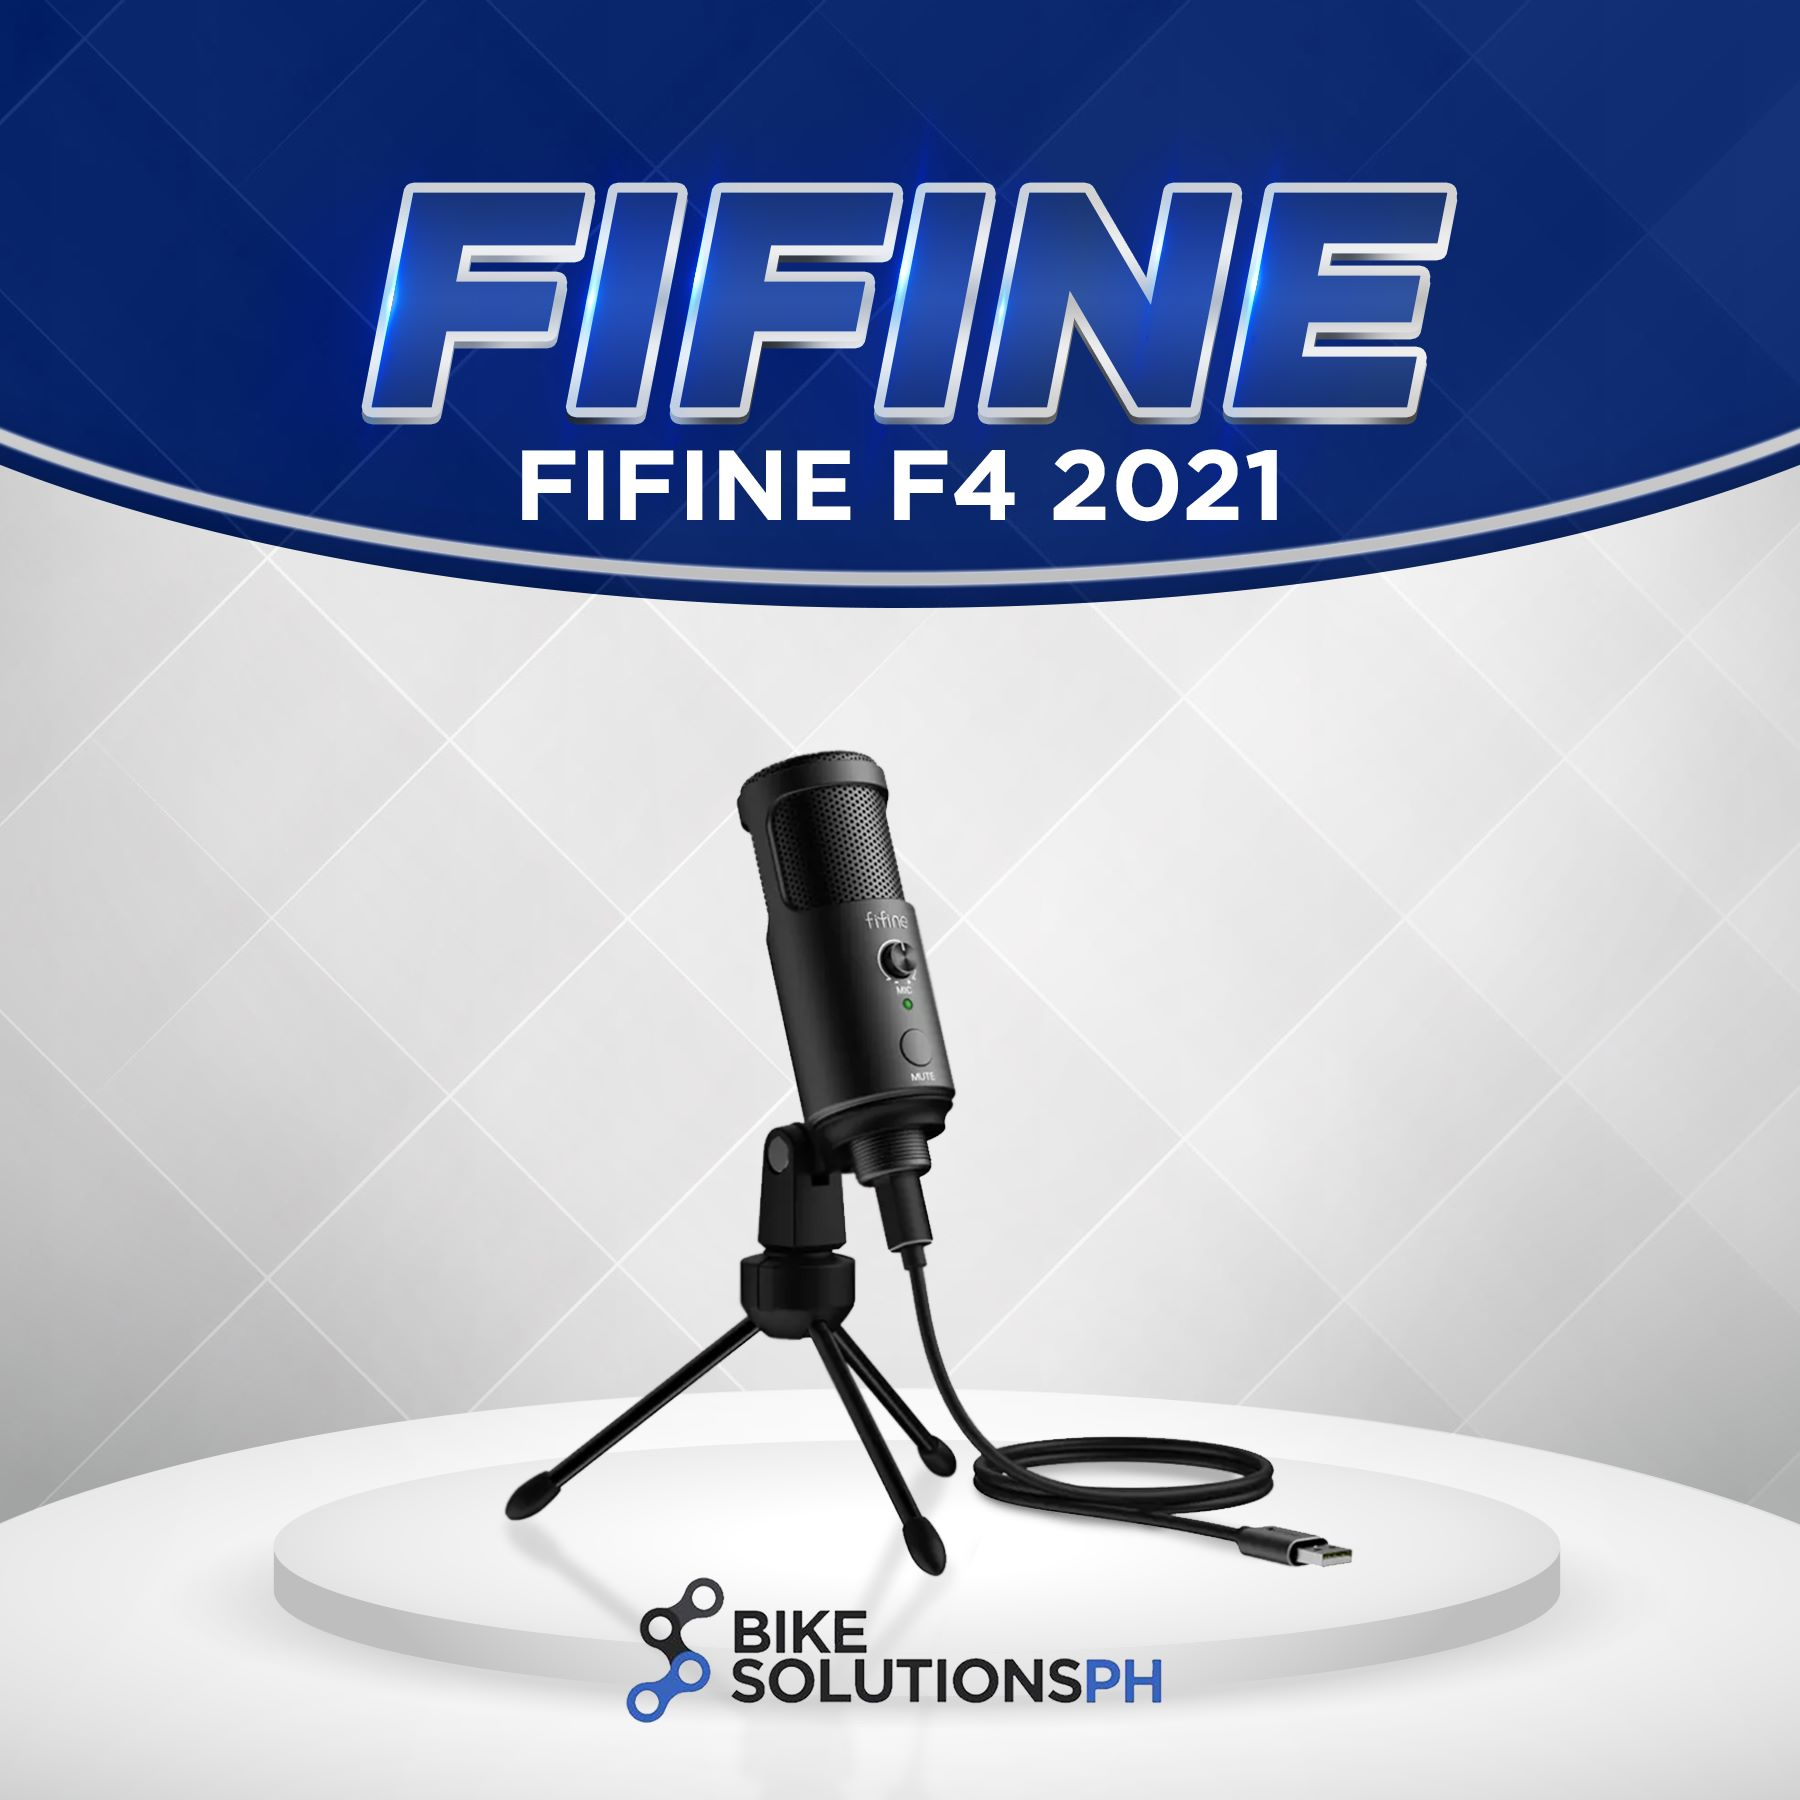 FIFINE Ampligame A6V USB Gaming RGB Microphone - Review